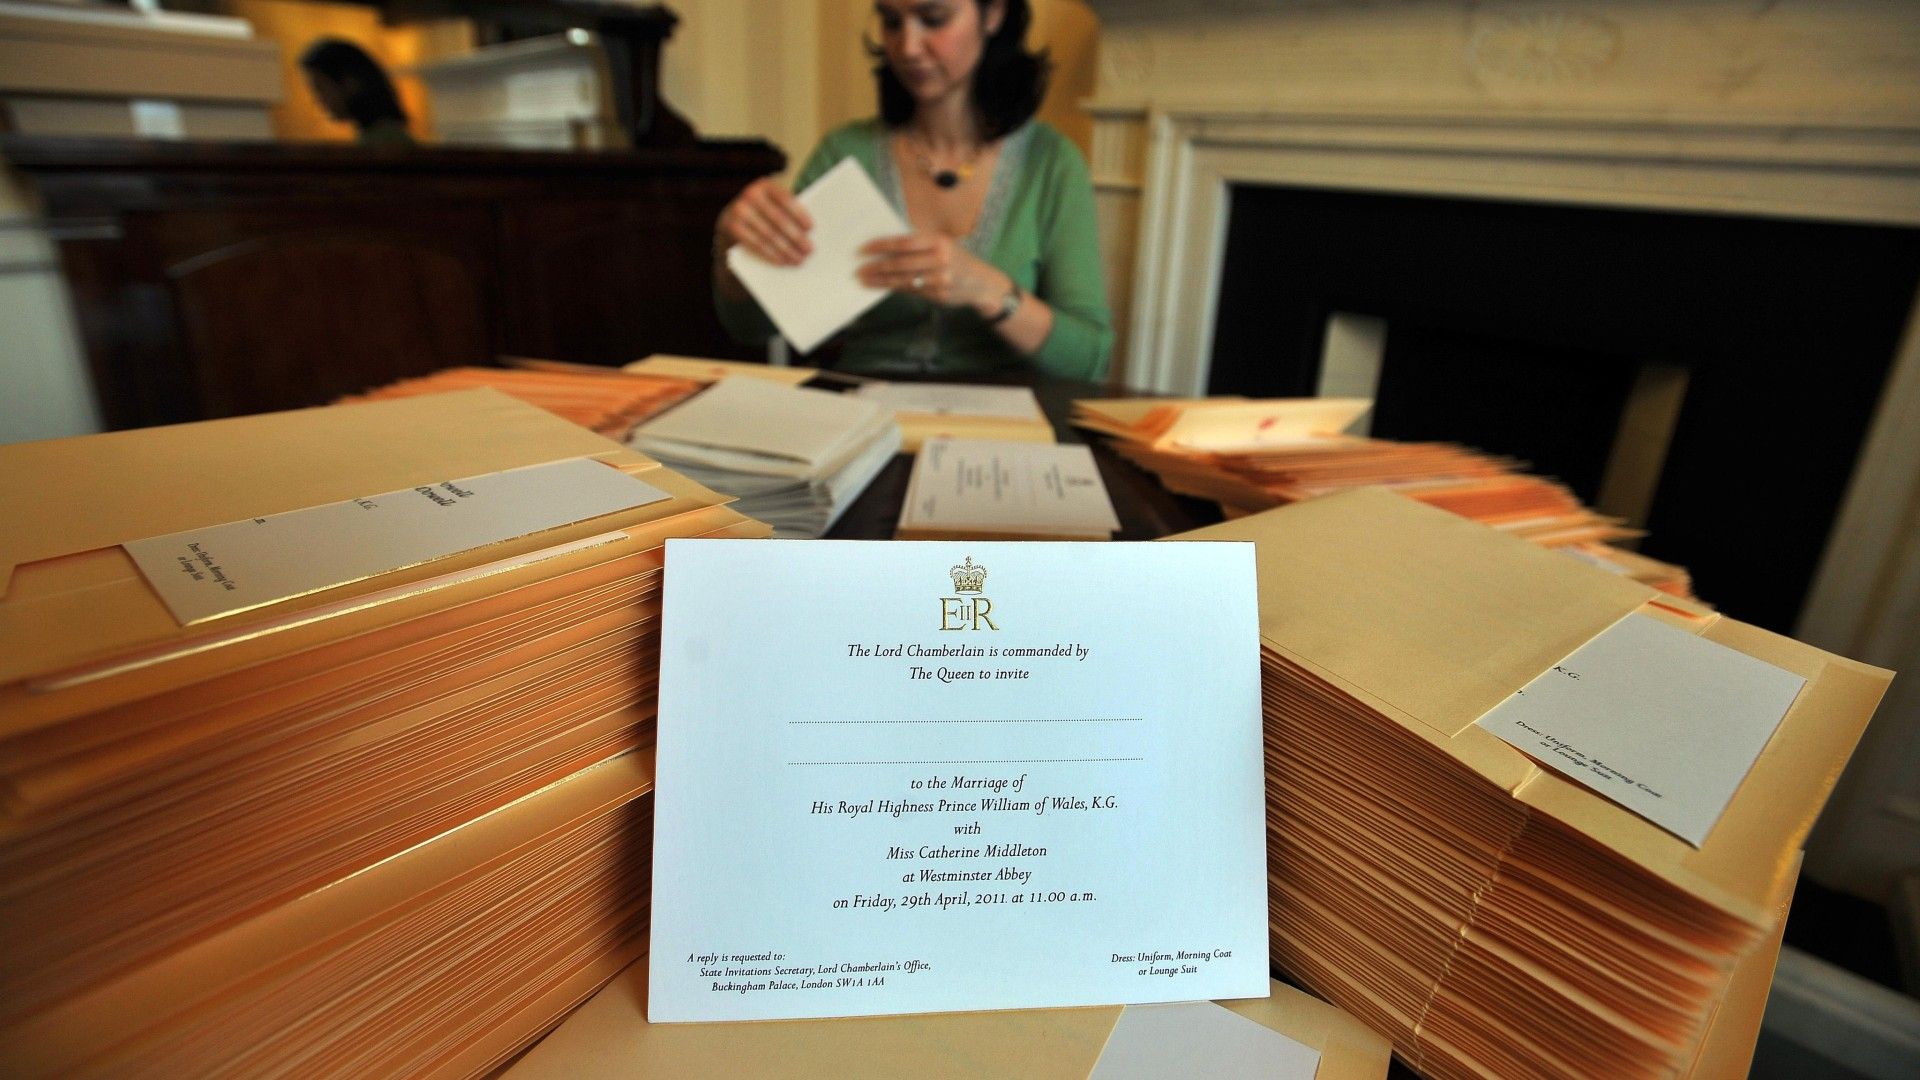 <p>                     Typically within the royal family, wedding invites are issued in the name of the monarch – meaning that technically, the reigning King or Queen officially invites guests to any royal bride and groom's wedding, rather than the couple getting hitched.                   </p>                                      <p>                     For example, Catherine Middleton and Prince William’s wedding invites were sent to an enormous 1,900 guests in the name of Queen Elizabeth II. In the same vein, wedding receptions are not traditionally officially 'held' by the couple getting married – instead, the reigning monarch and the Prince of Wales will officially act as hosts.                   </p>